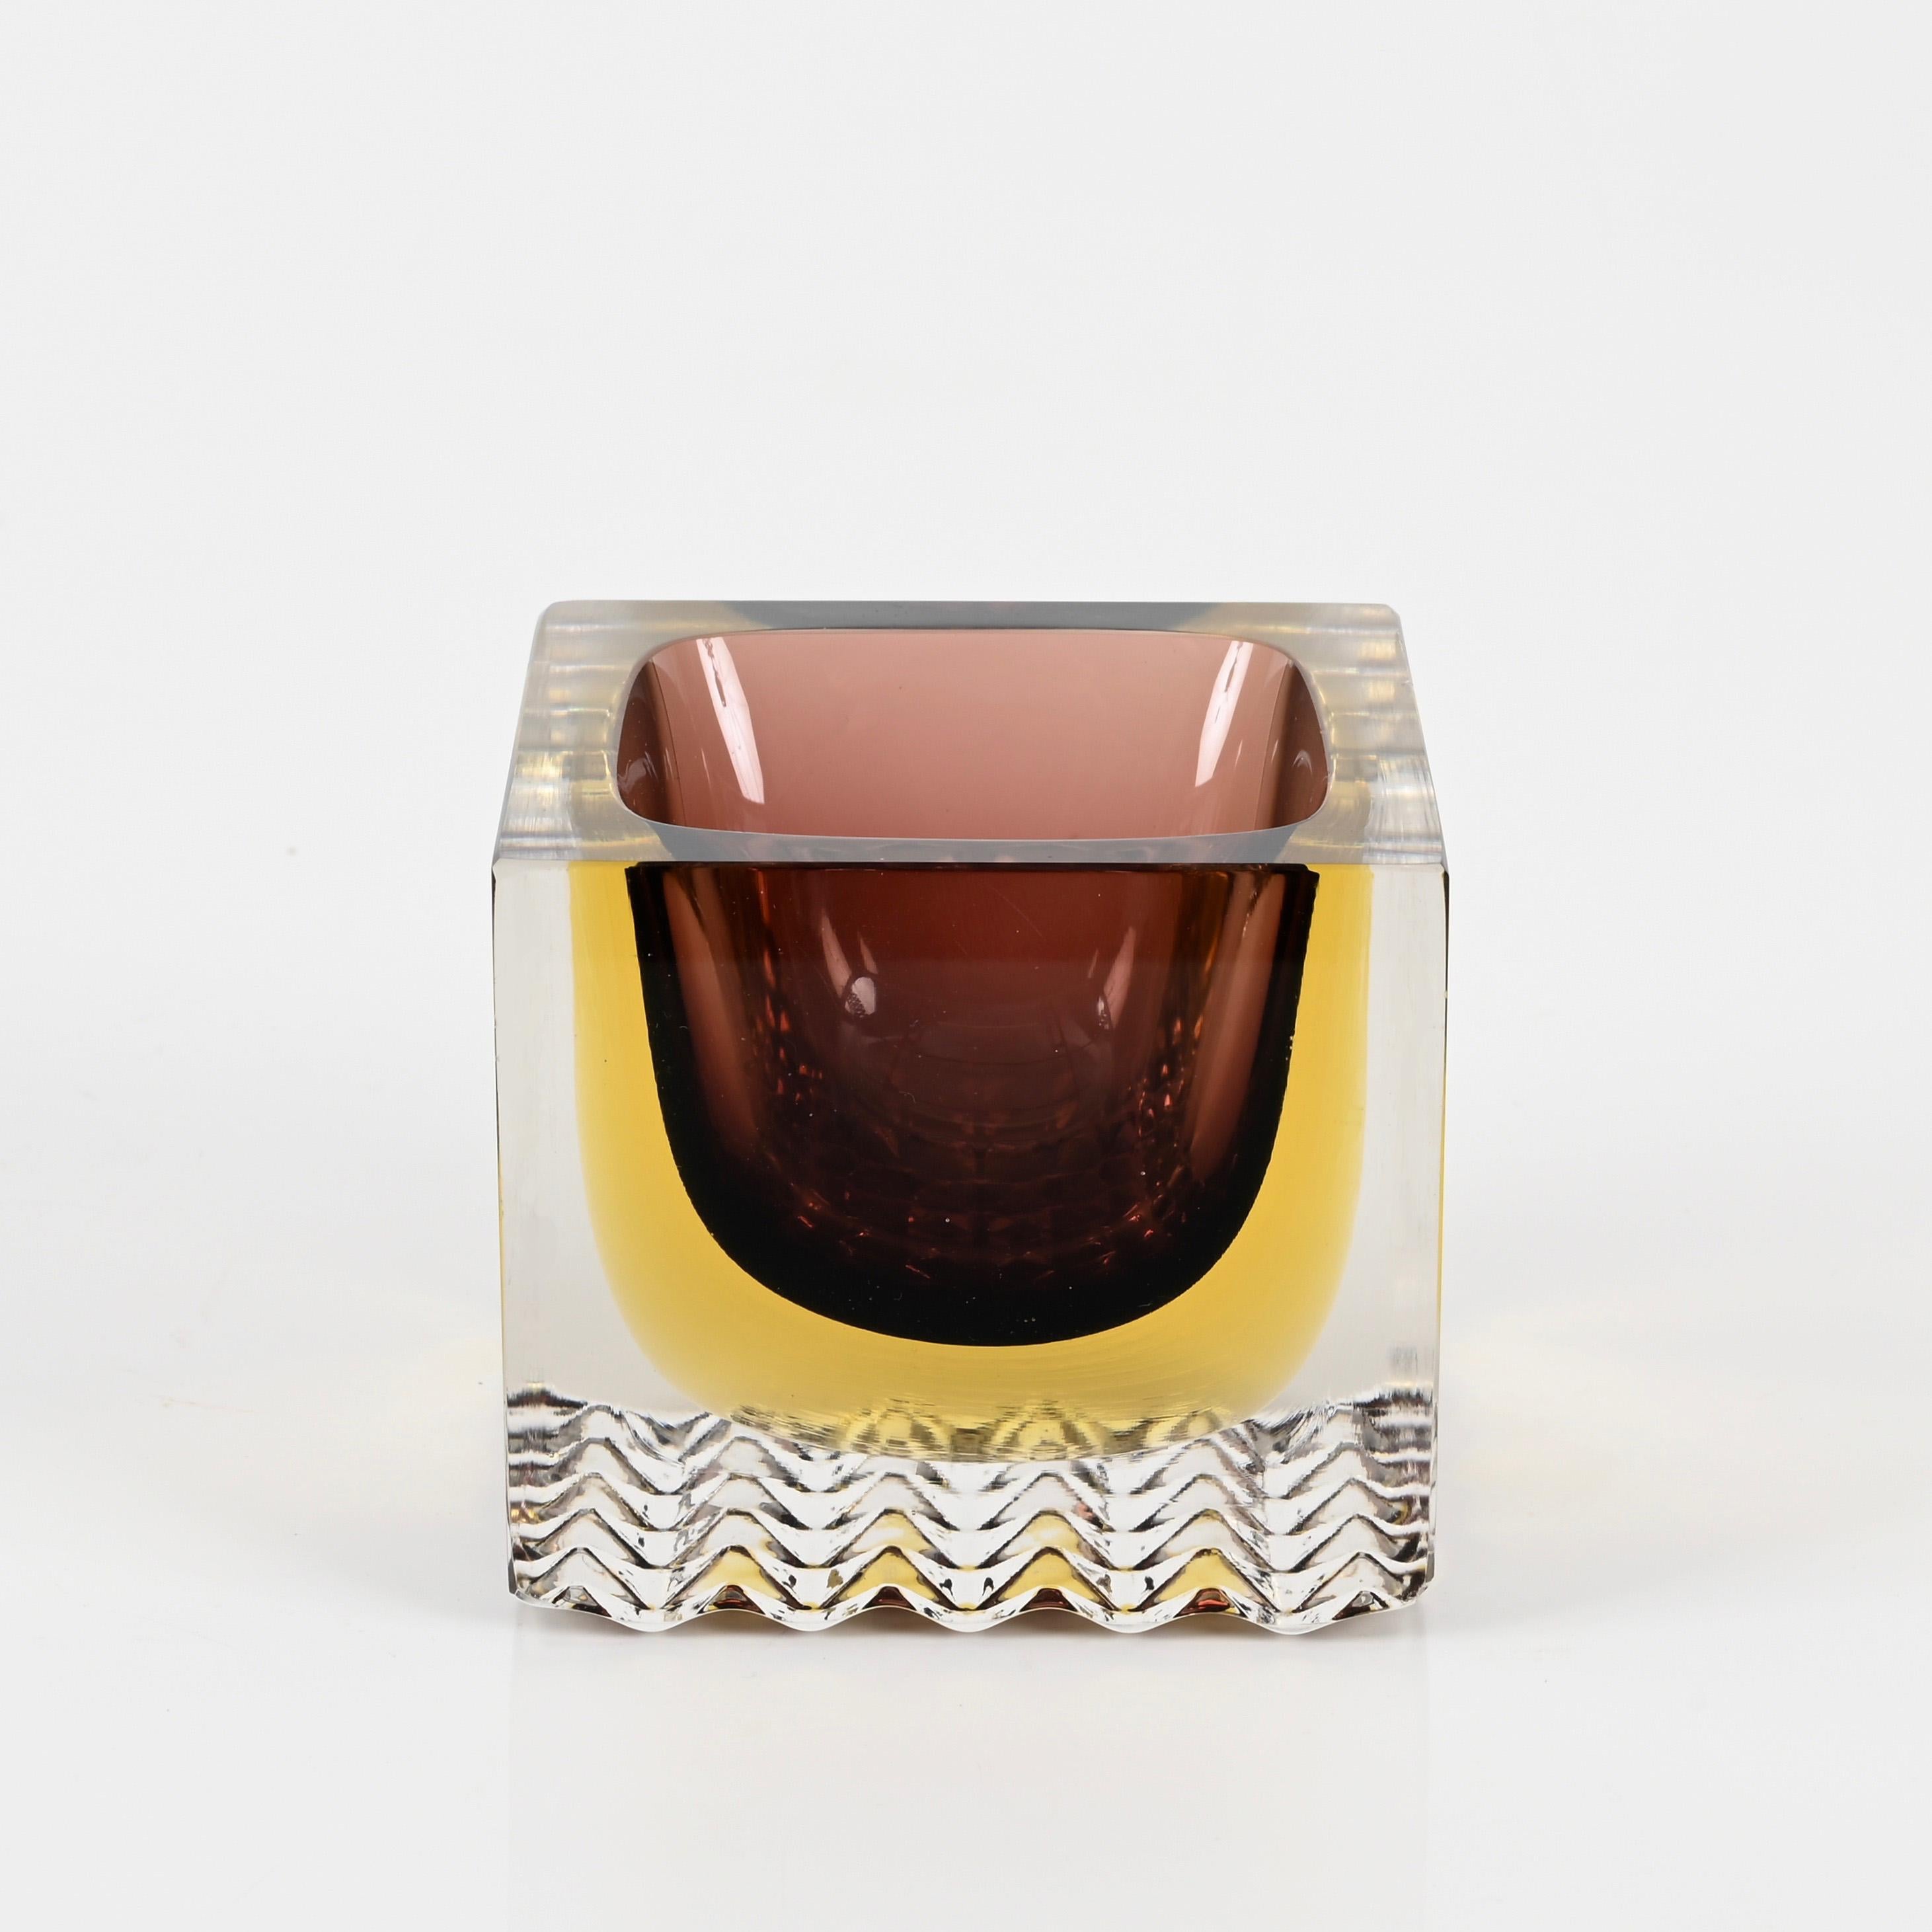 Hand-Crafted Murano Decorative Glass in Sommerso Merlot and Yellow Glass, F. Poli Italy, 1960 For Sale